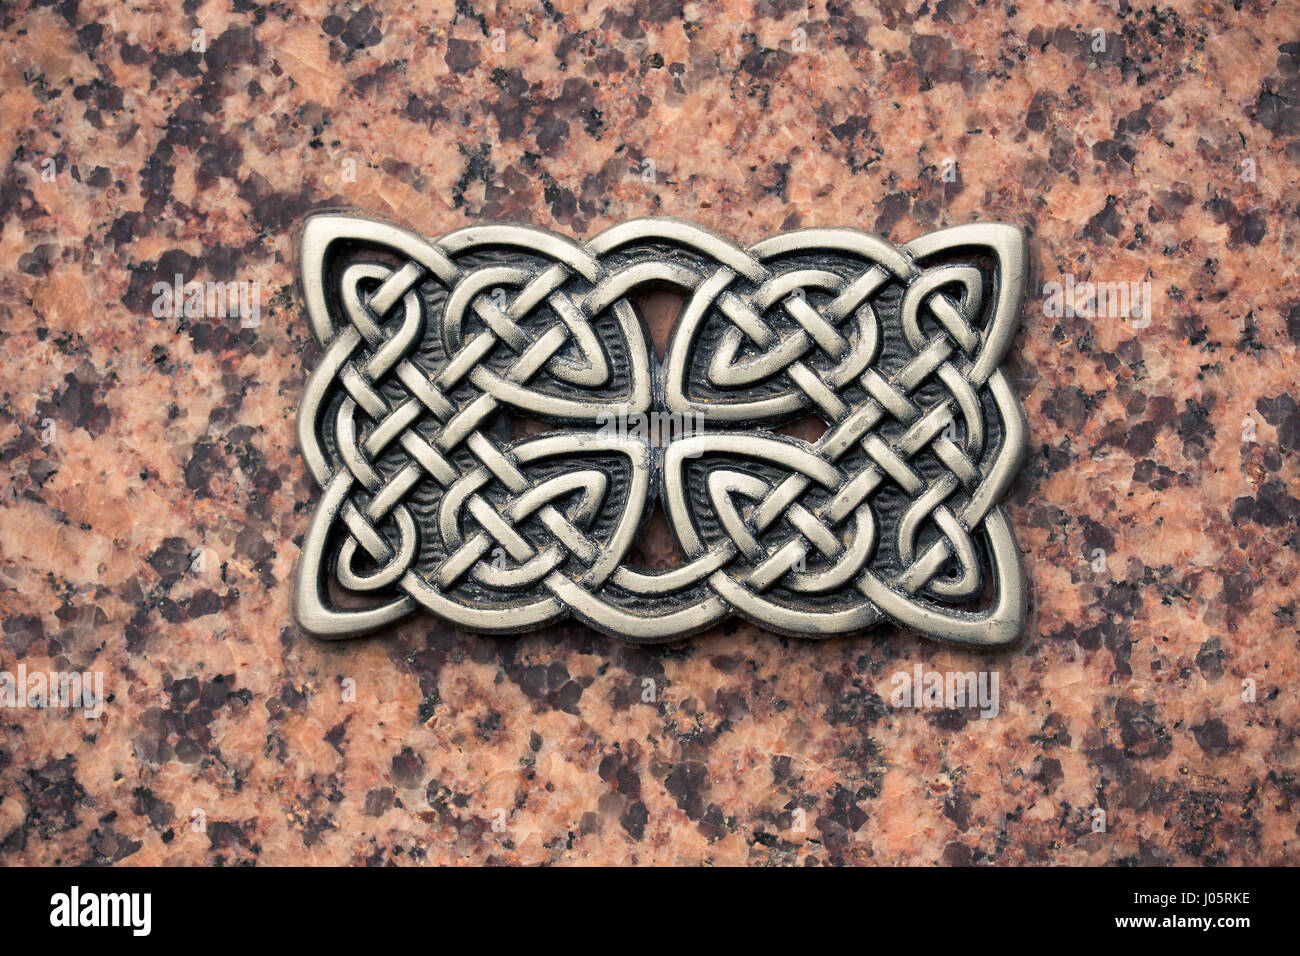 Iron cast celtic knot on a stone surface. Stock Photo